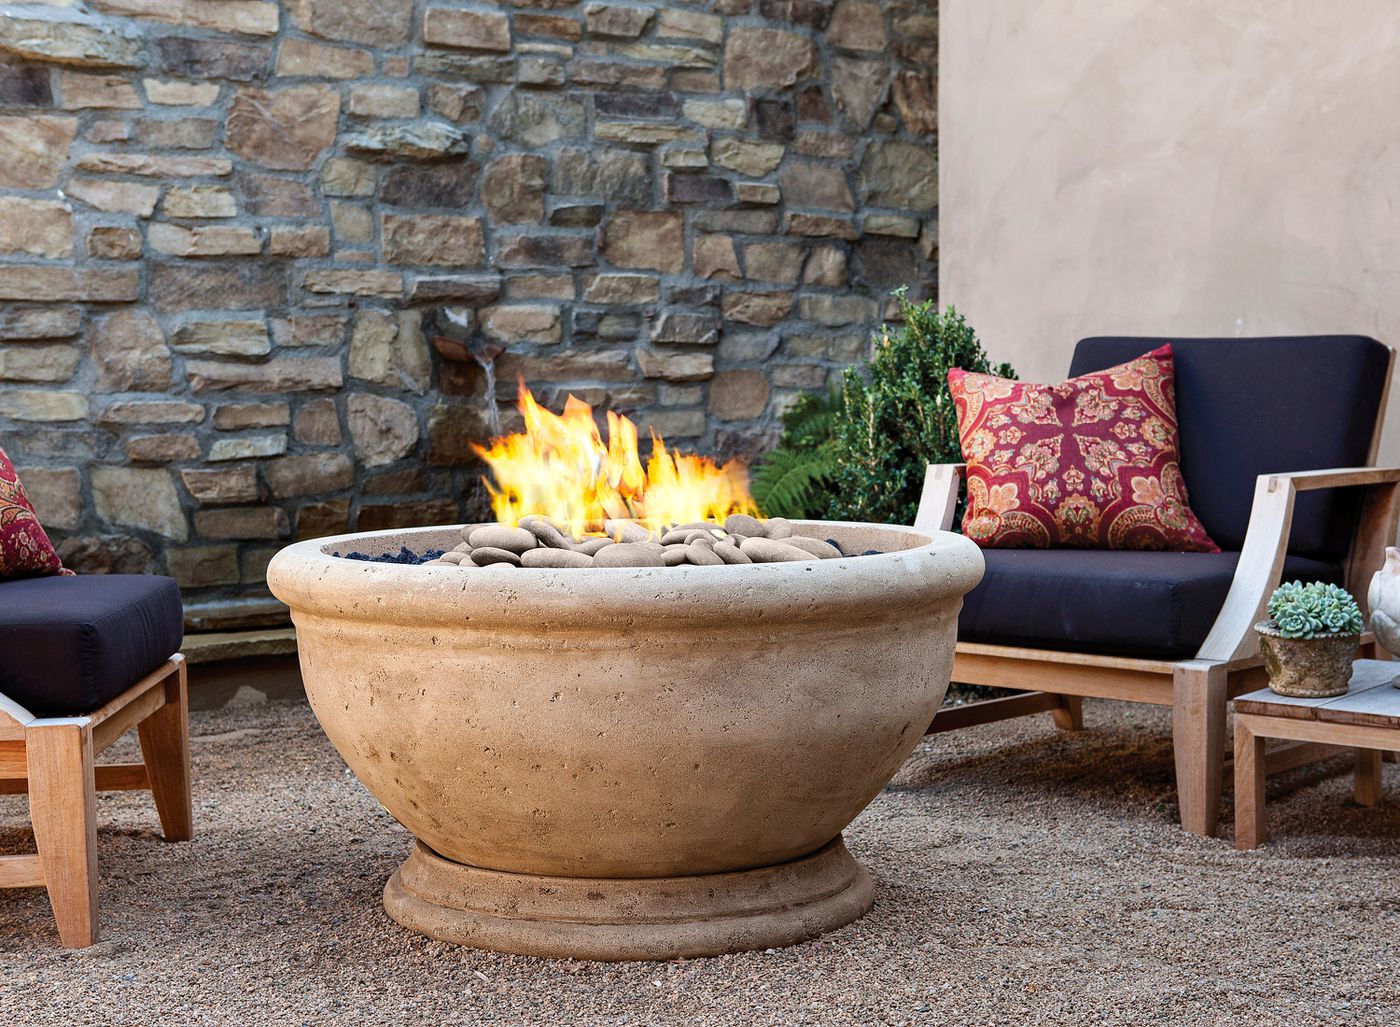 All About Fire Pits This Old House